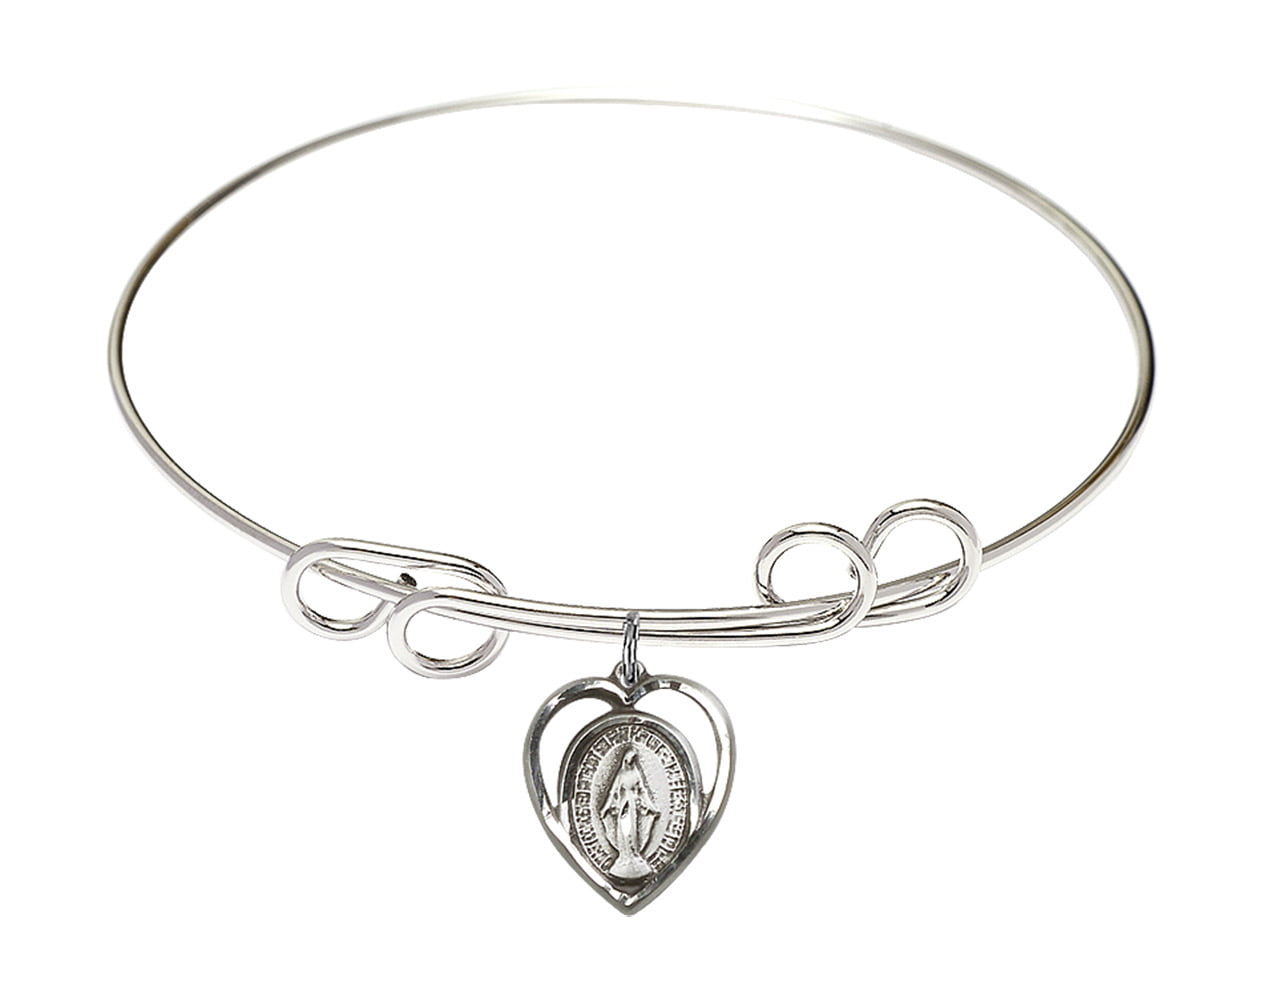 Rhodium Plate Double Loop Bangle Bracelet with Miraculous Medal Charm 8 Inch